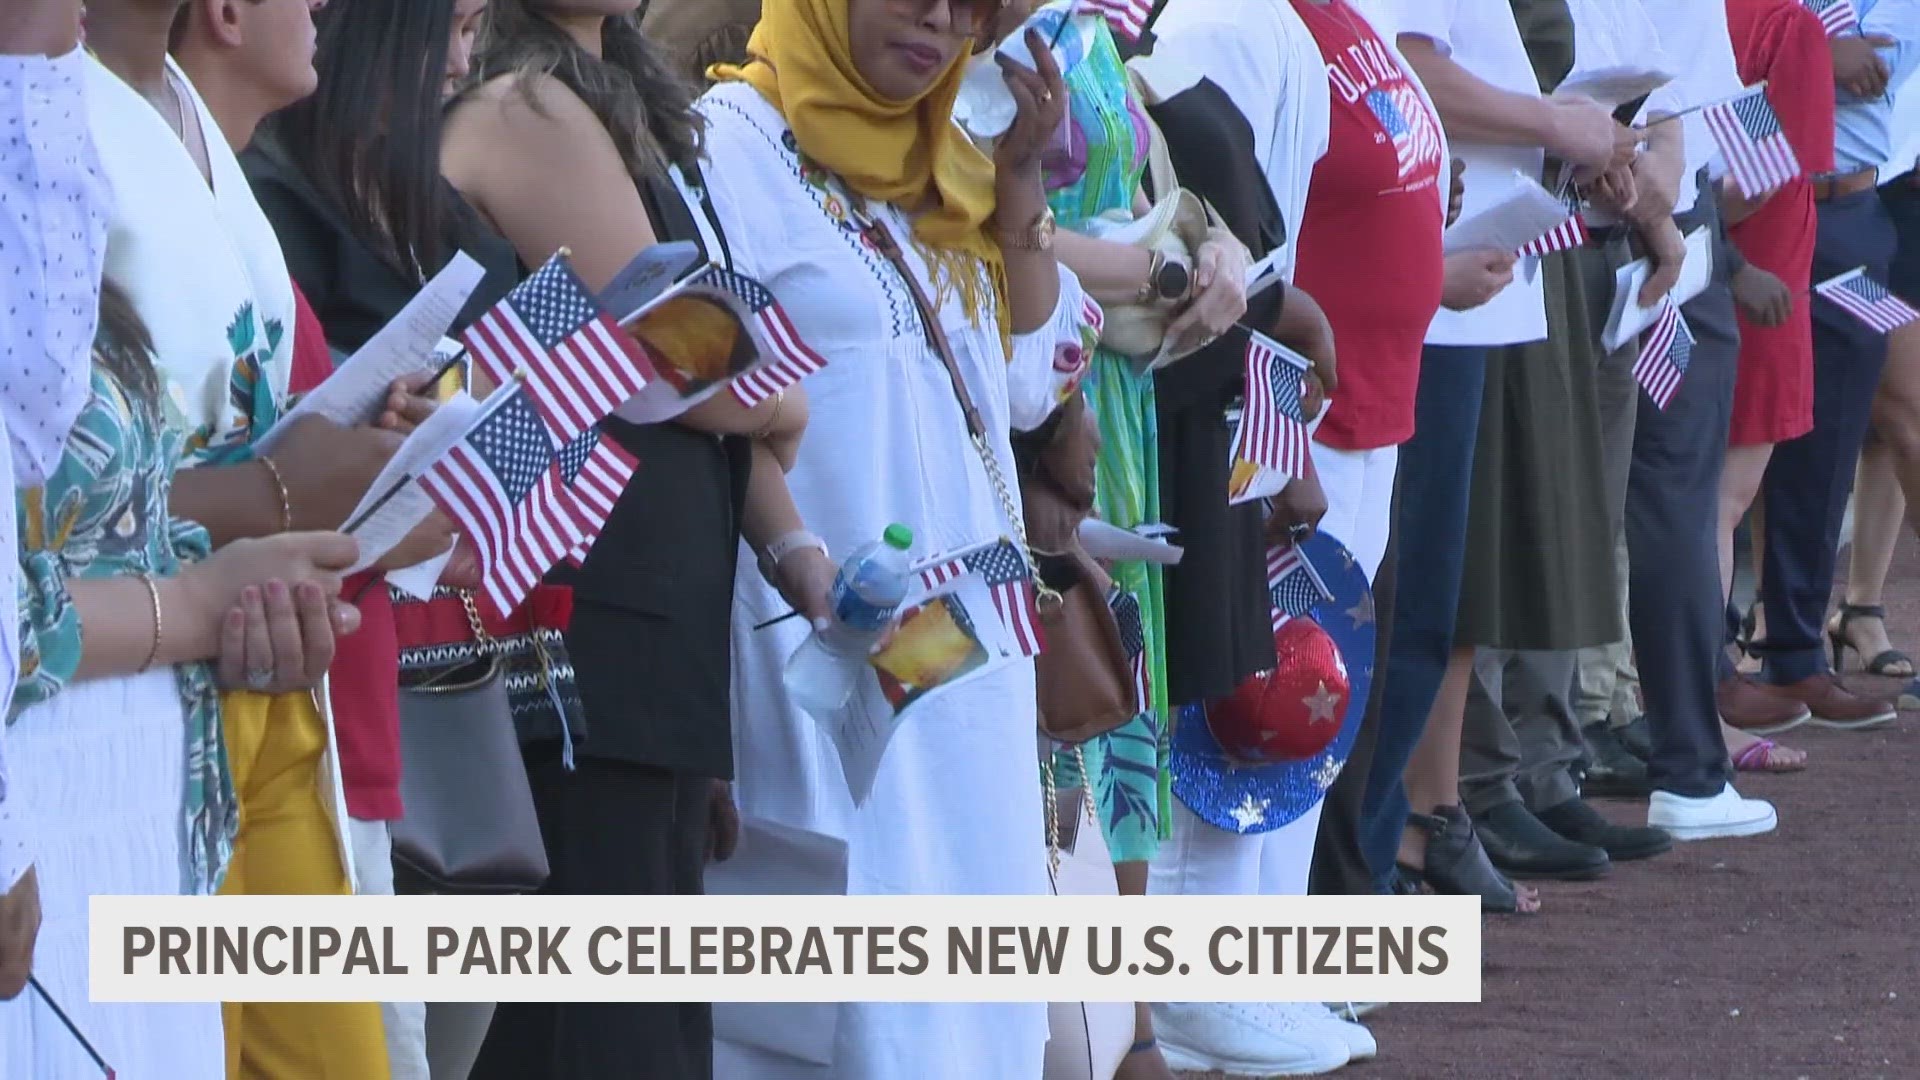 Principal Park has welcomed 450 U.S. Citizens over the past 15 years in its annual Fourth of July naturalization ceremony.